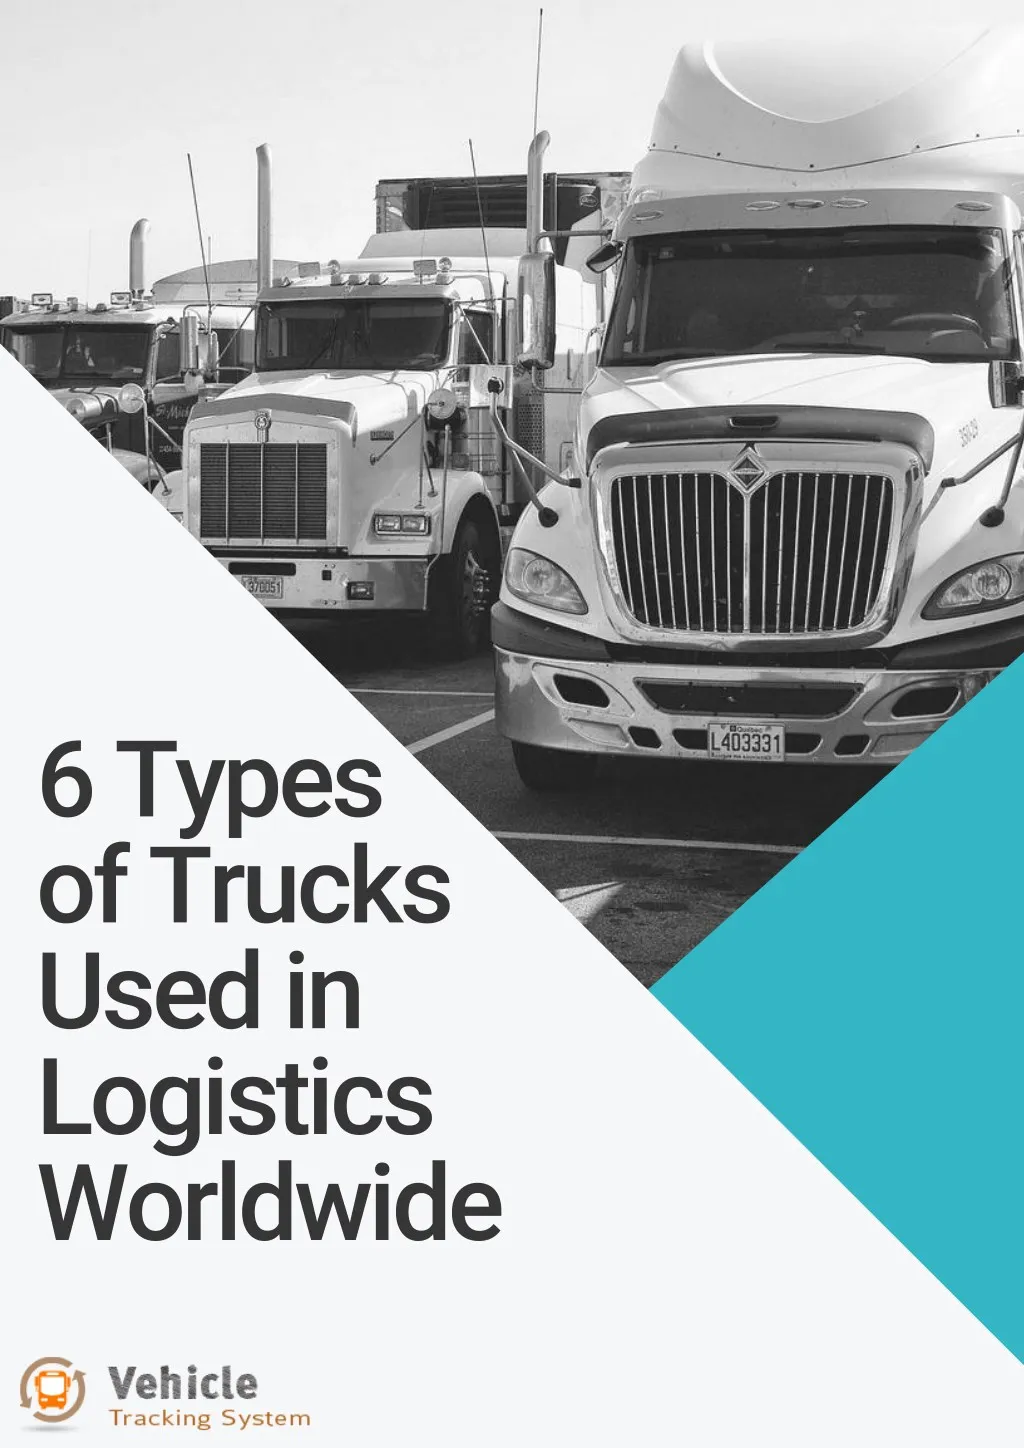 6 types of trucks used in logistics worldwide